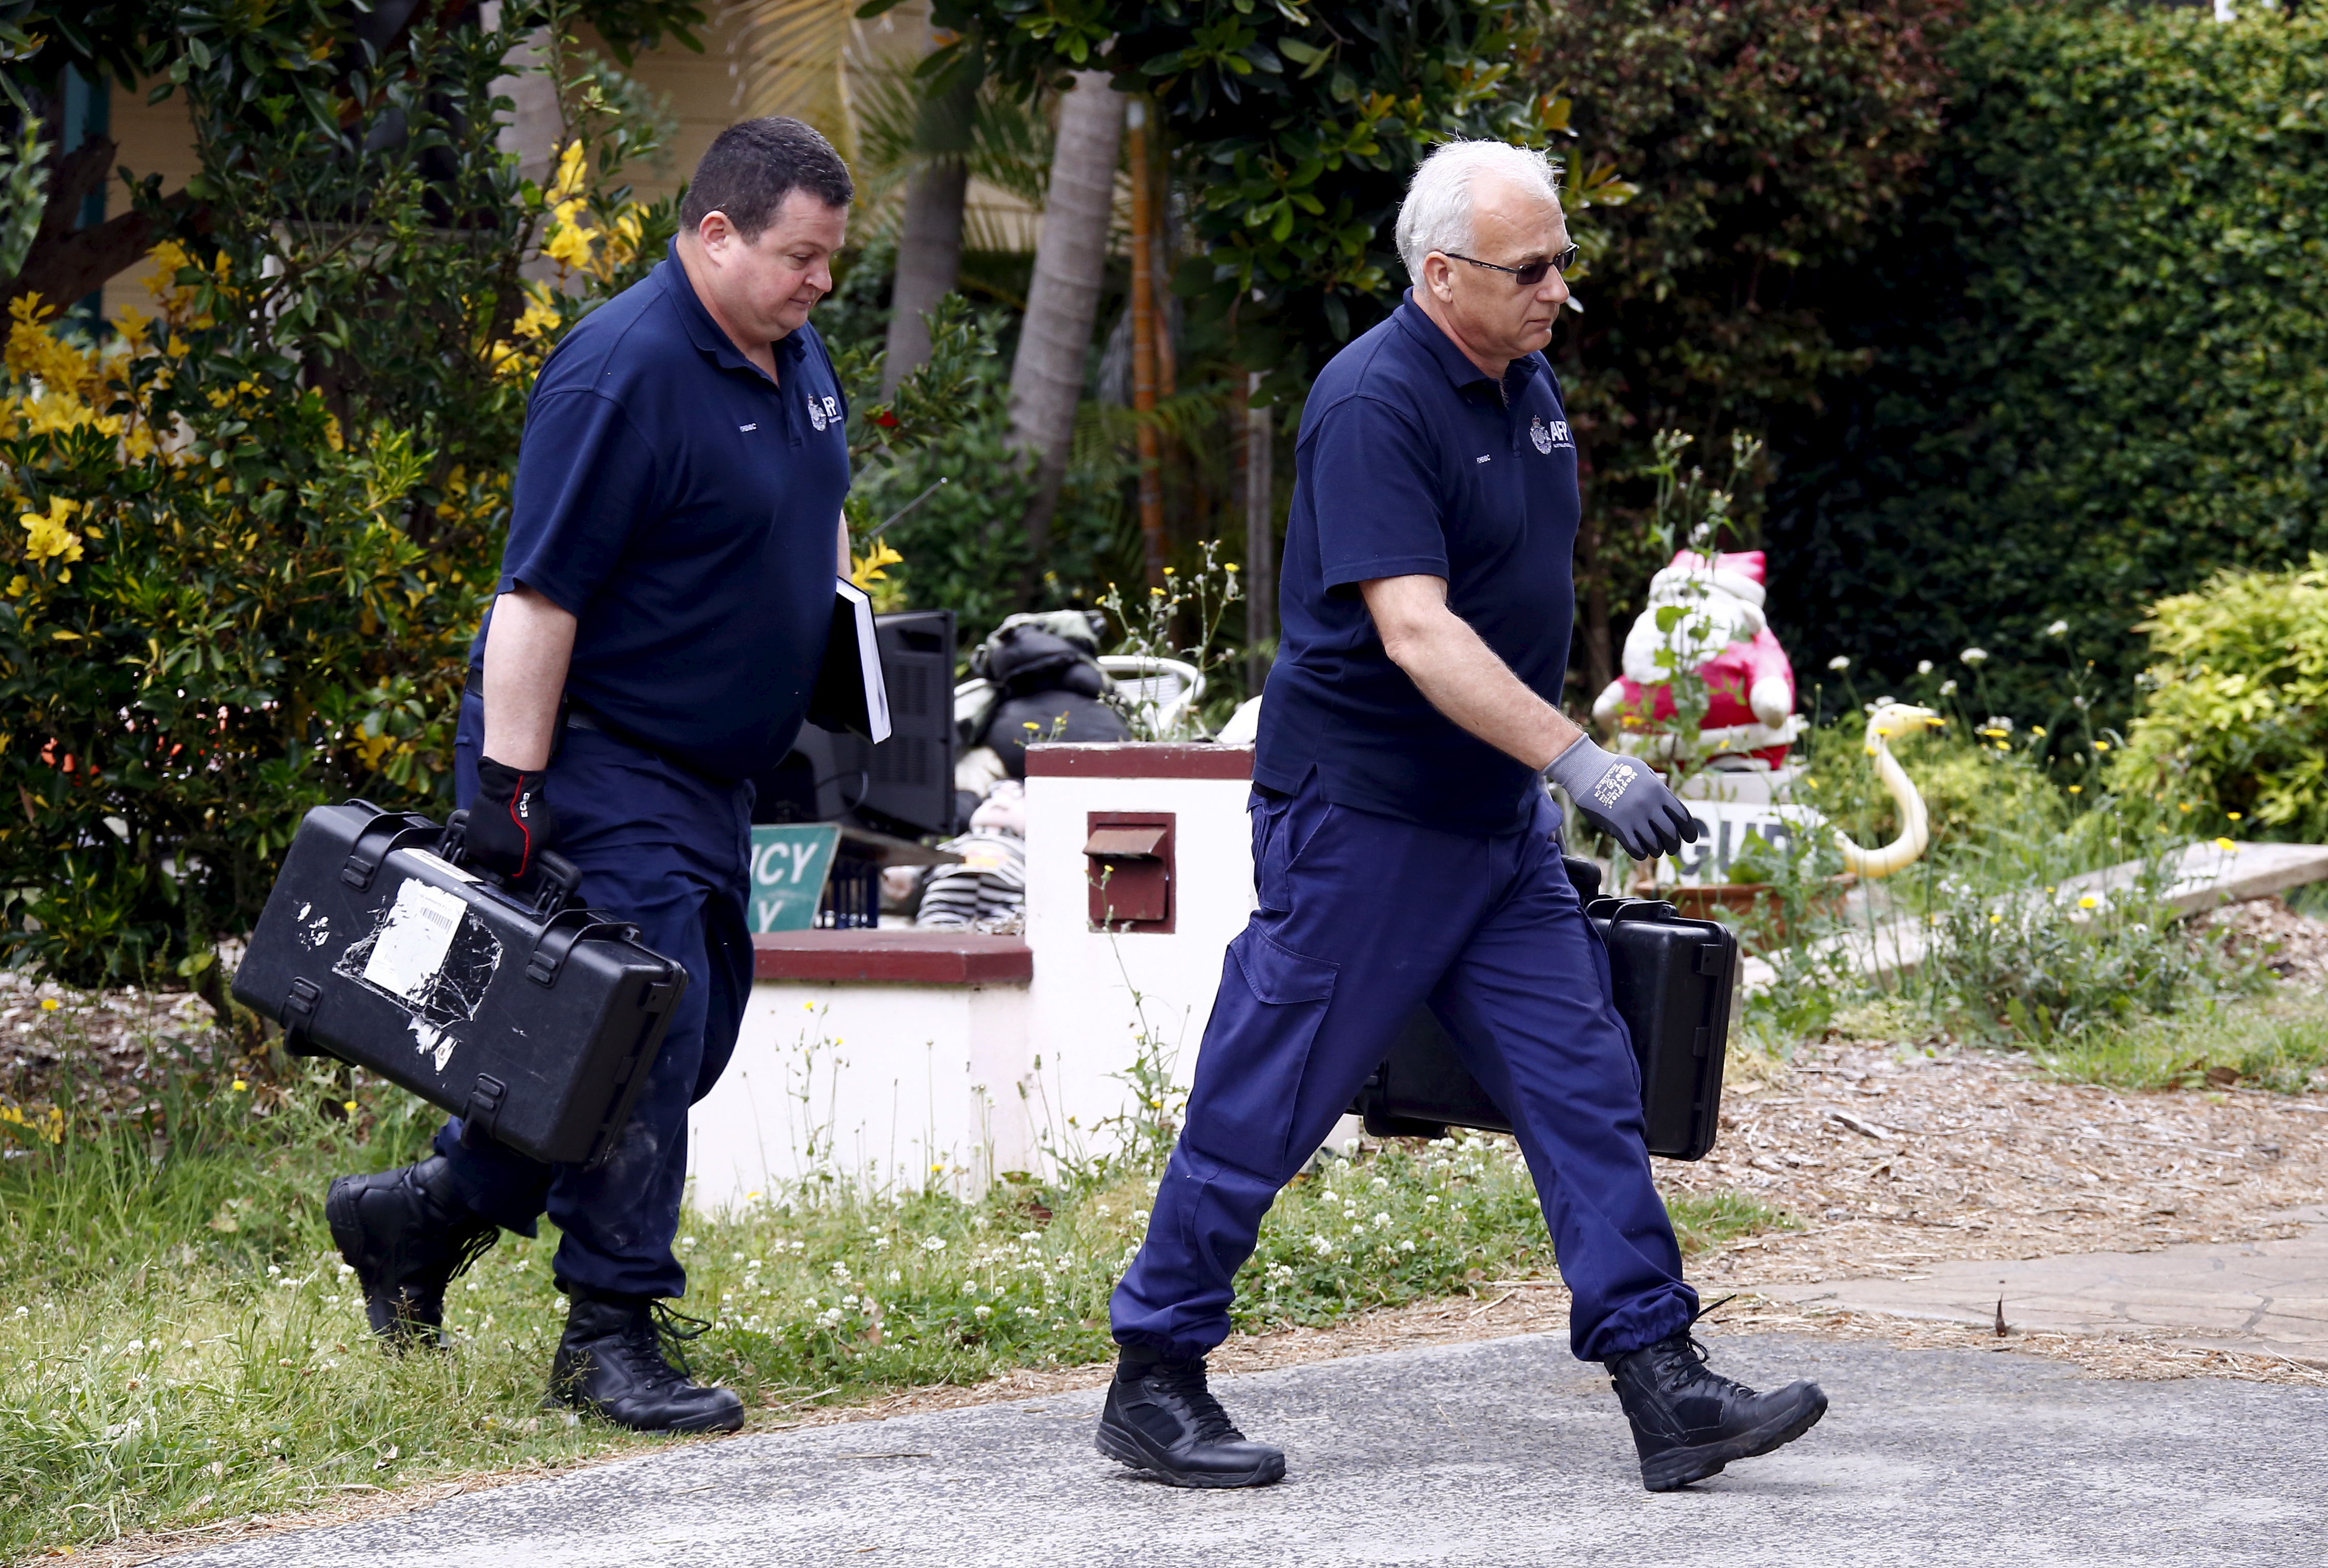 Australian federal police officers carry equipment into a house after arresting a man during early morning raids in western Sydney on Oct. 7, 2015 (David Gray—Reuters)